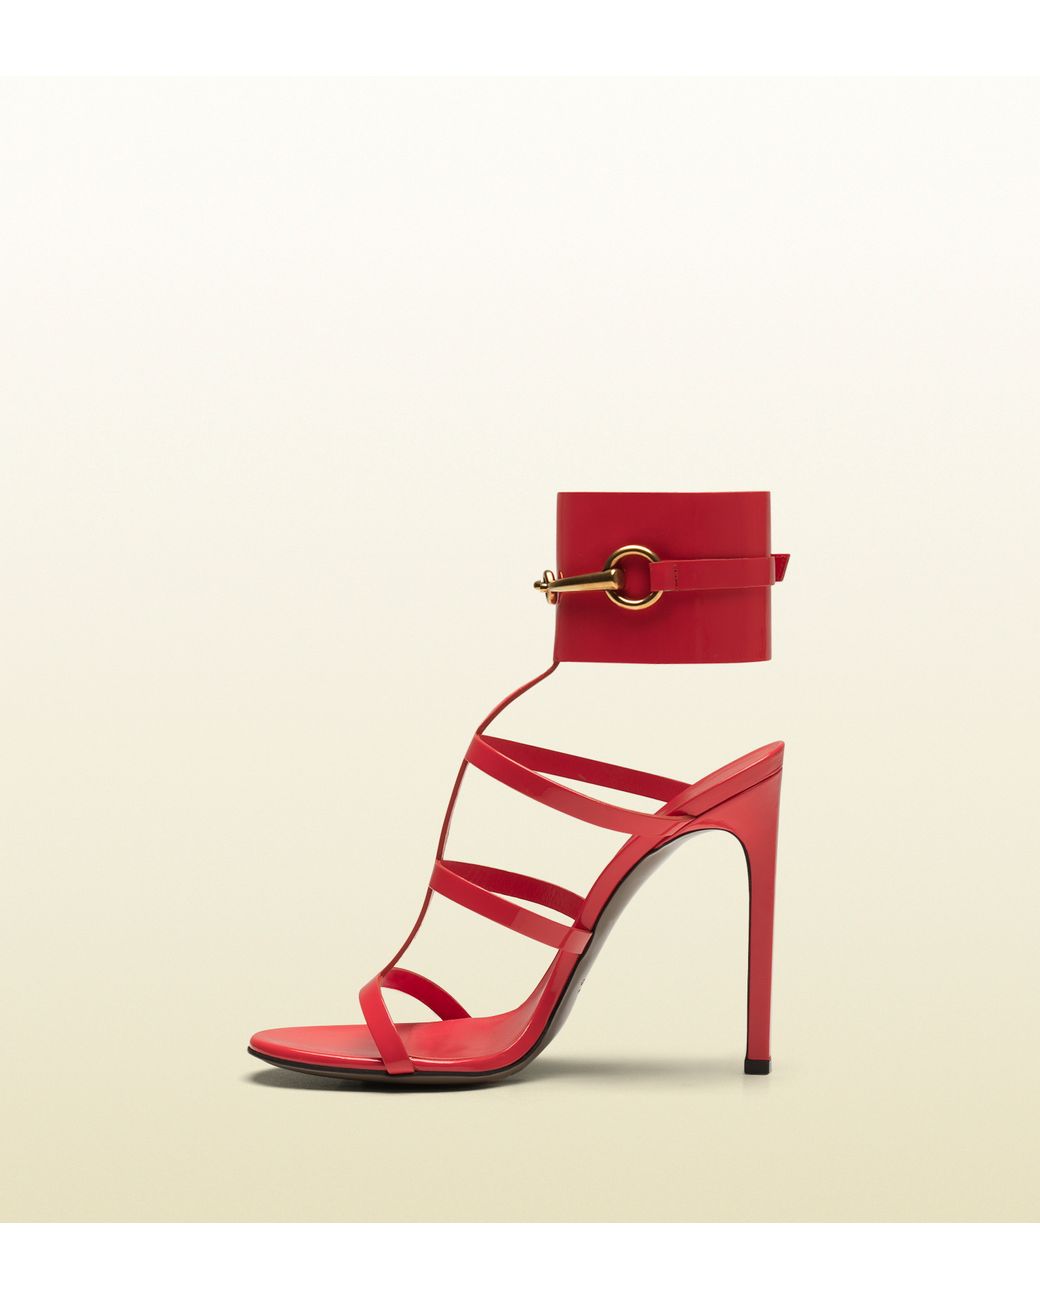 Gucci Ursula Anklestrap High Heel Sandal in Red | Lyst